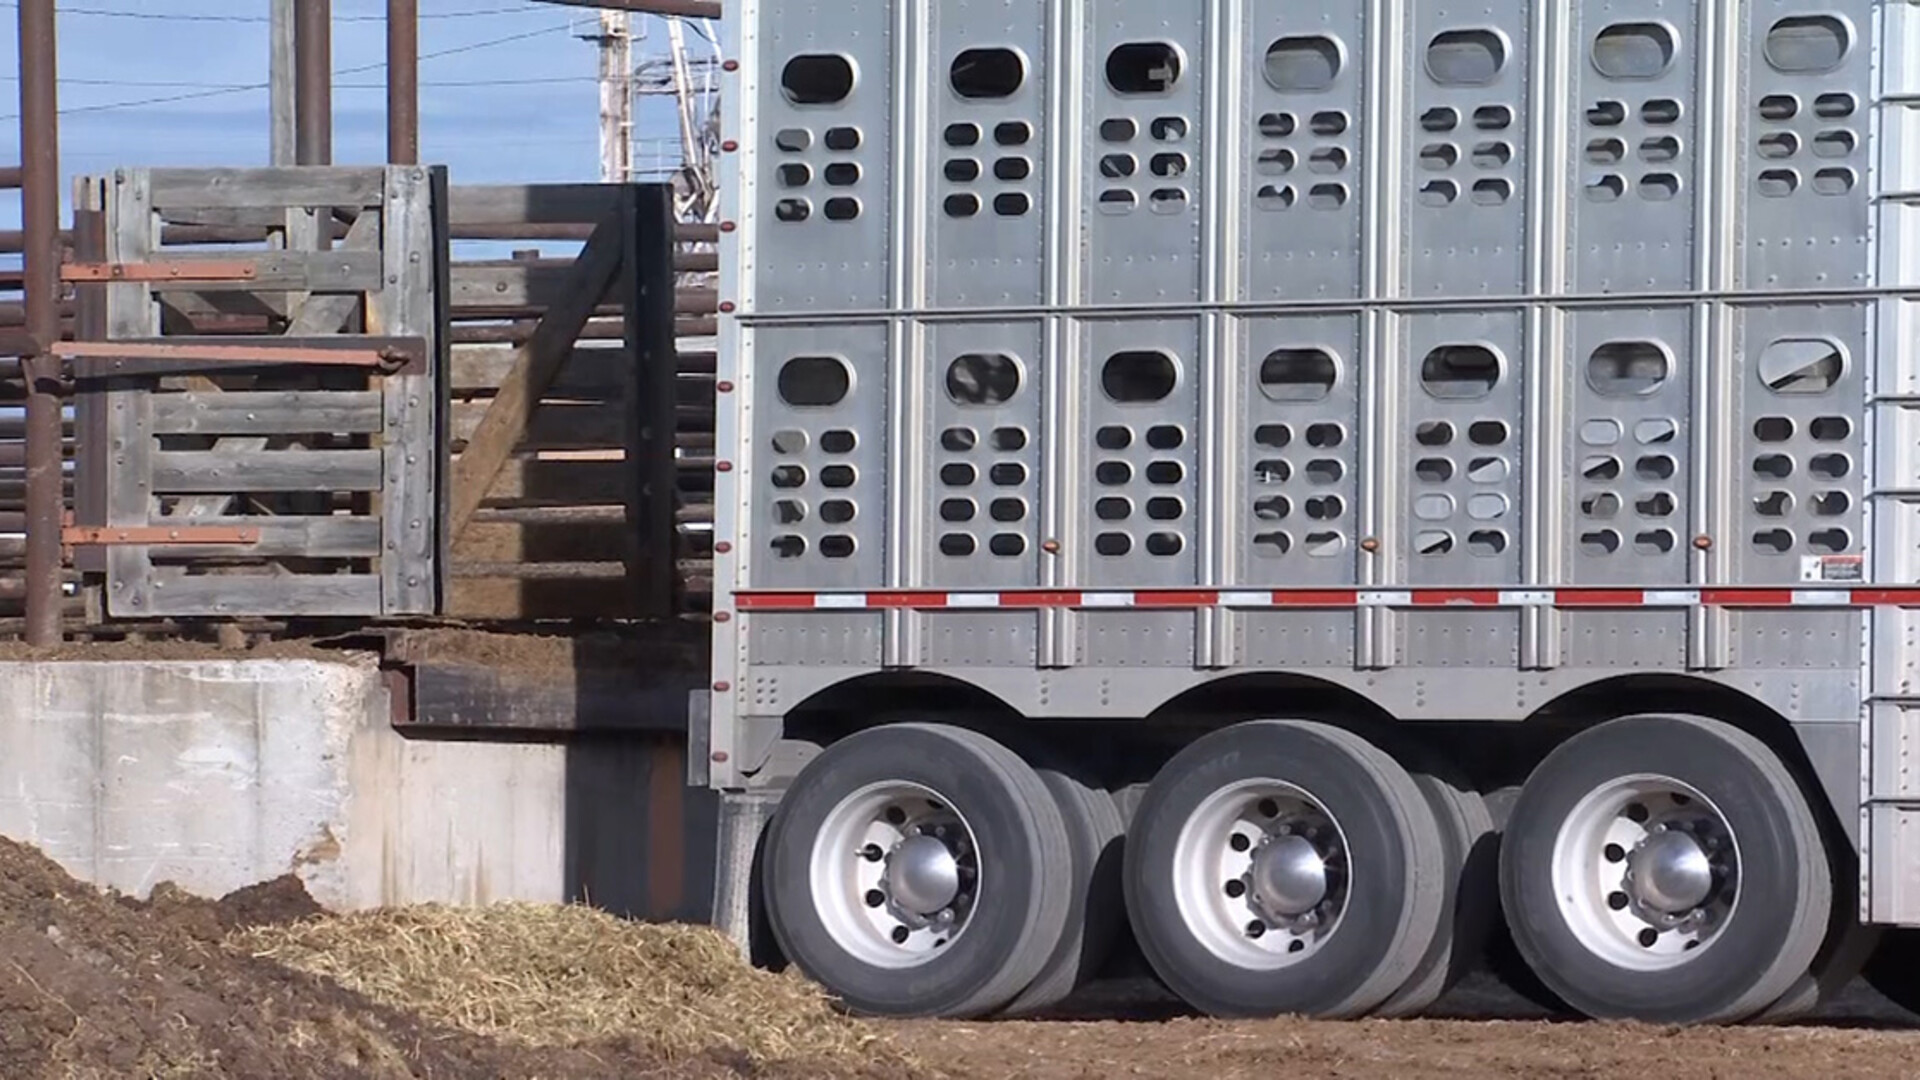 Extension Secured of Critical Exemption for Livestock Haulers